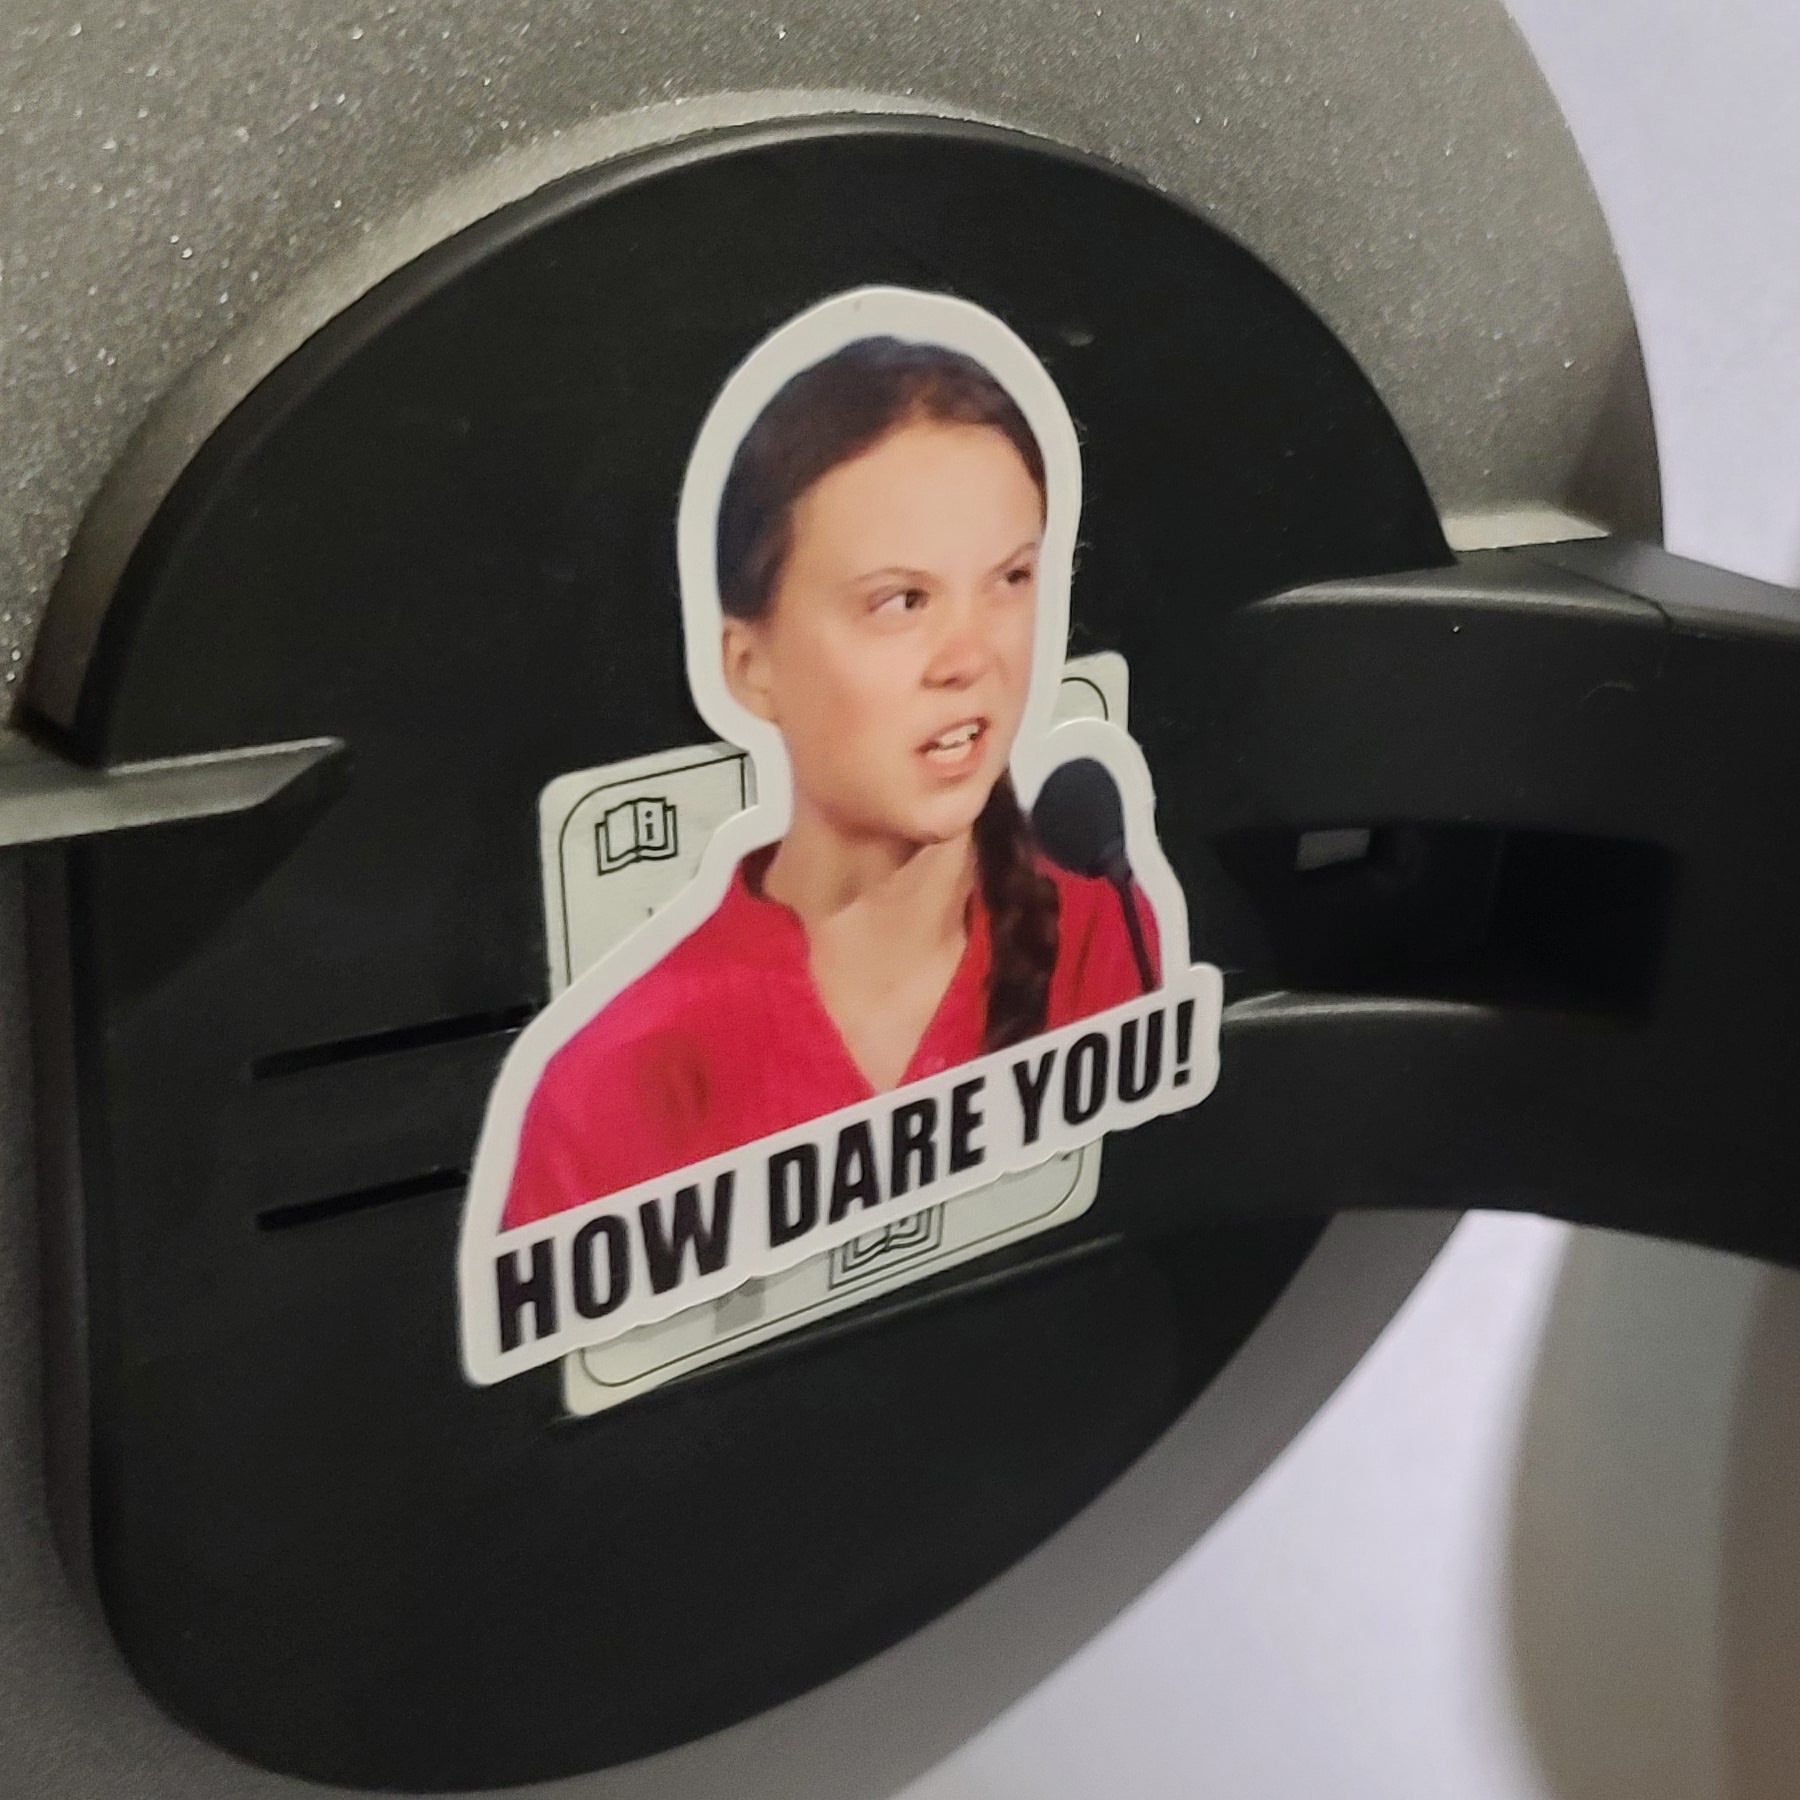 HOW DARE YOU - Sticker sheet - For your gas tank / gas can / lawn mower Climate Change Custom stickers Die cut stickers Gas engine Global Warming Graphic design stickers Greta Greta Sticker Greta Thurnburg gretta Gretta Sticker How Dare you how dare you sticker Kiss cut stickers Peel and stick stickers Sticker design Sticker printing Sticker sheets Vinyl stickers WEF World Economic Forum